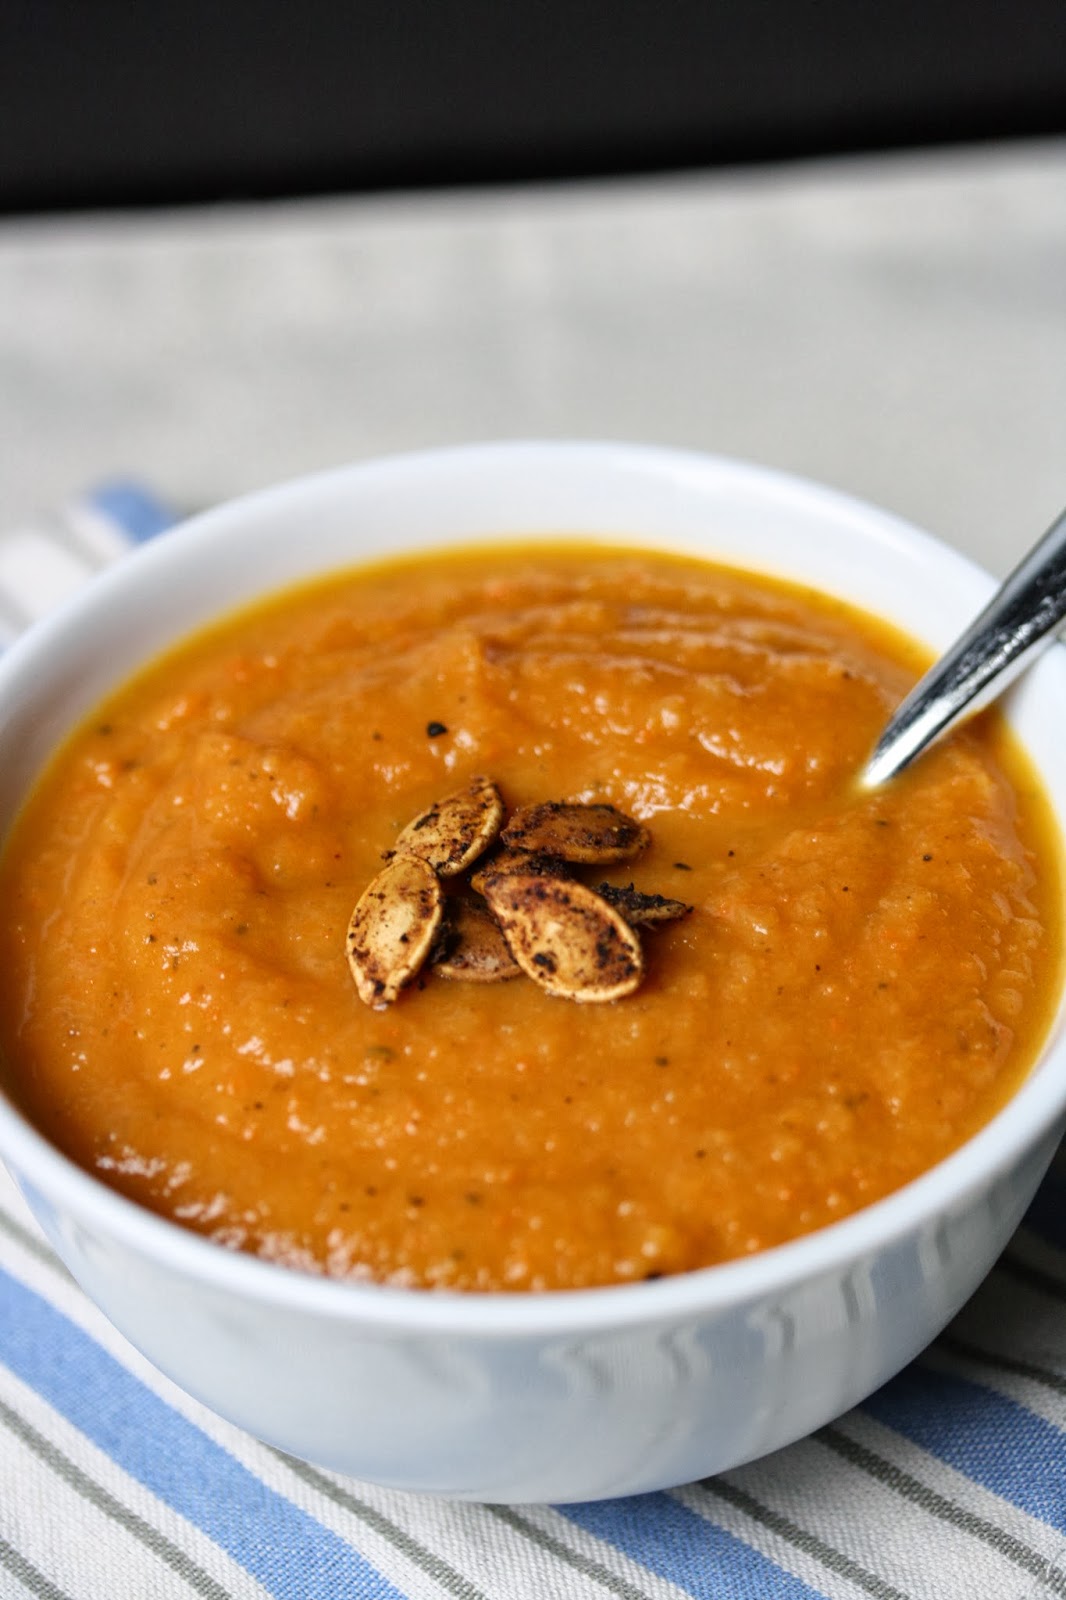 Hot Dinner Happy Home: Roasted Sweet Potato and Carrot Soup